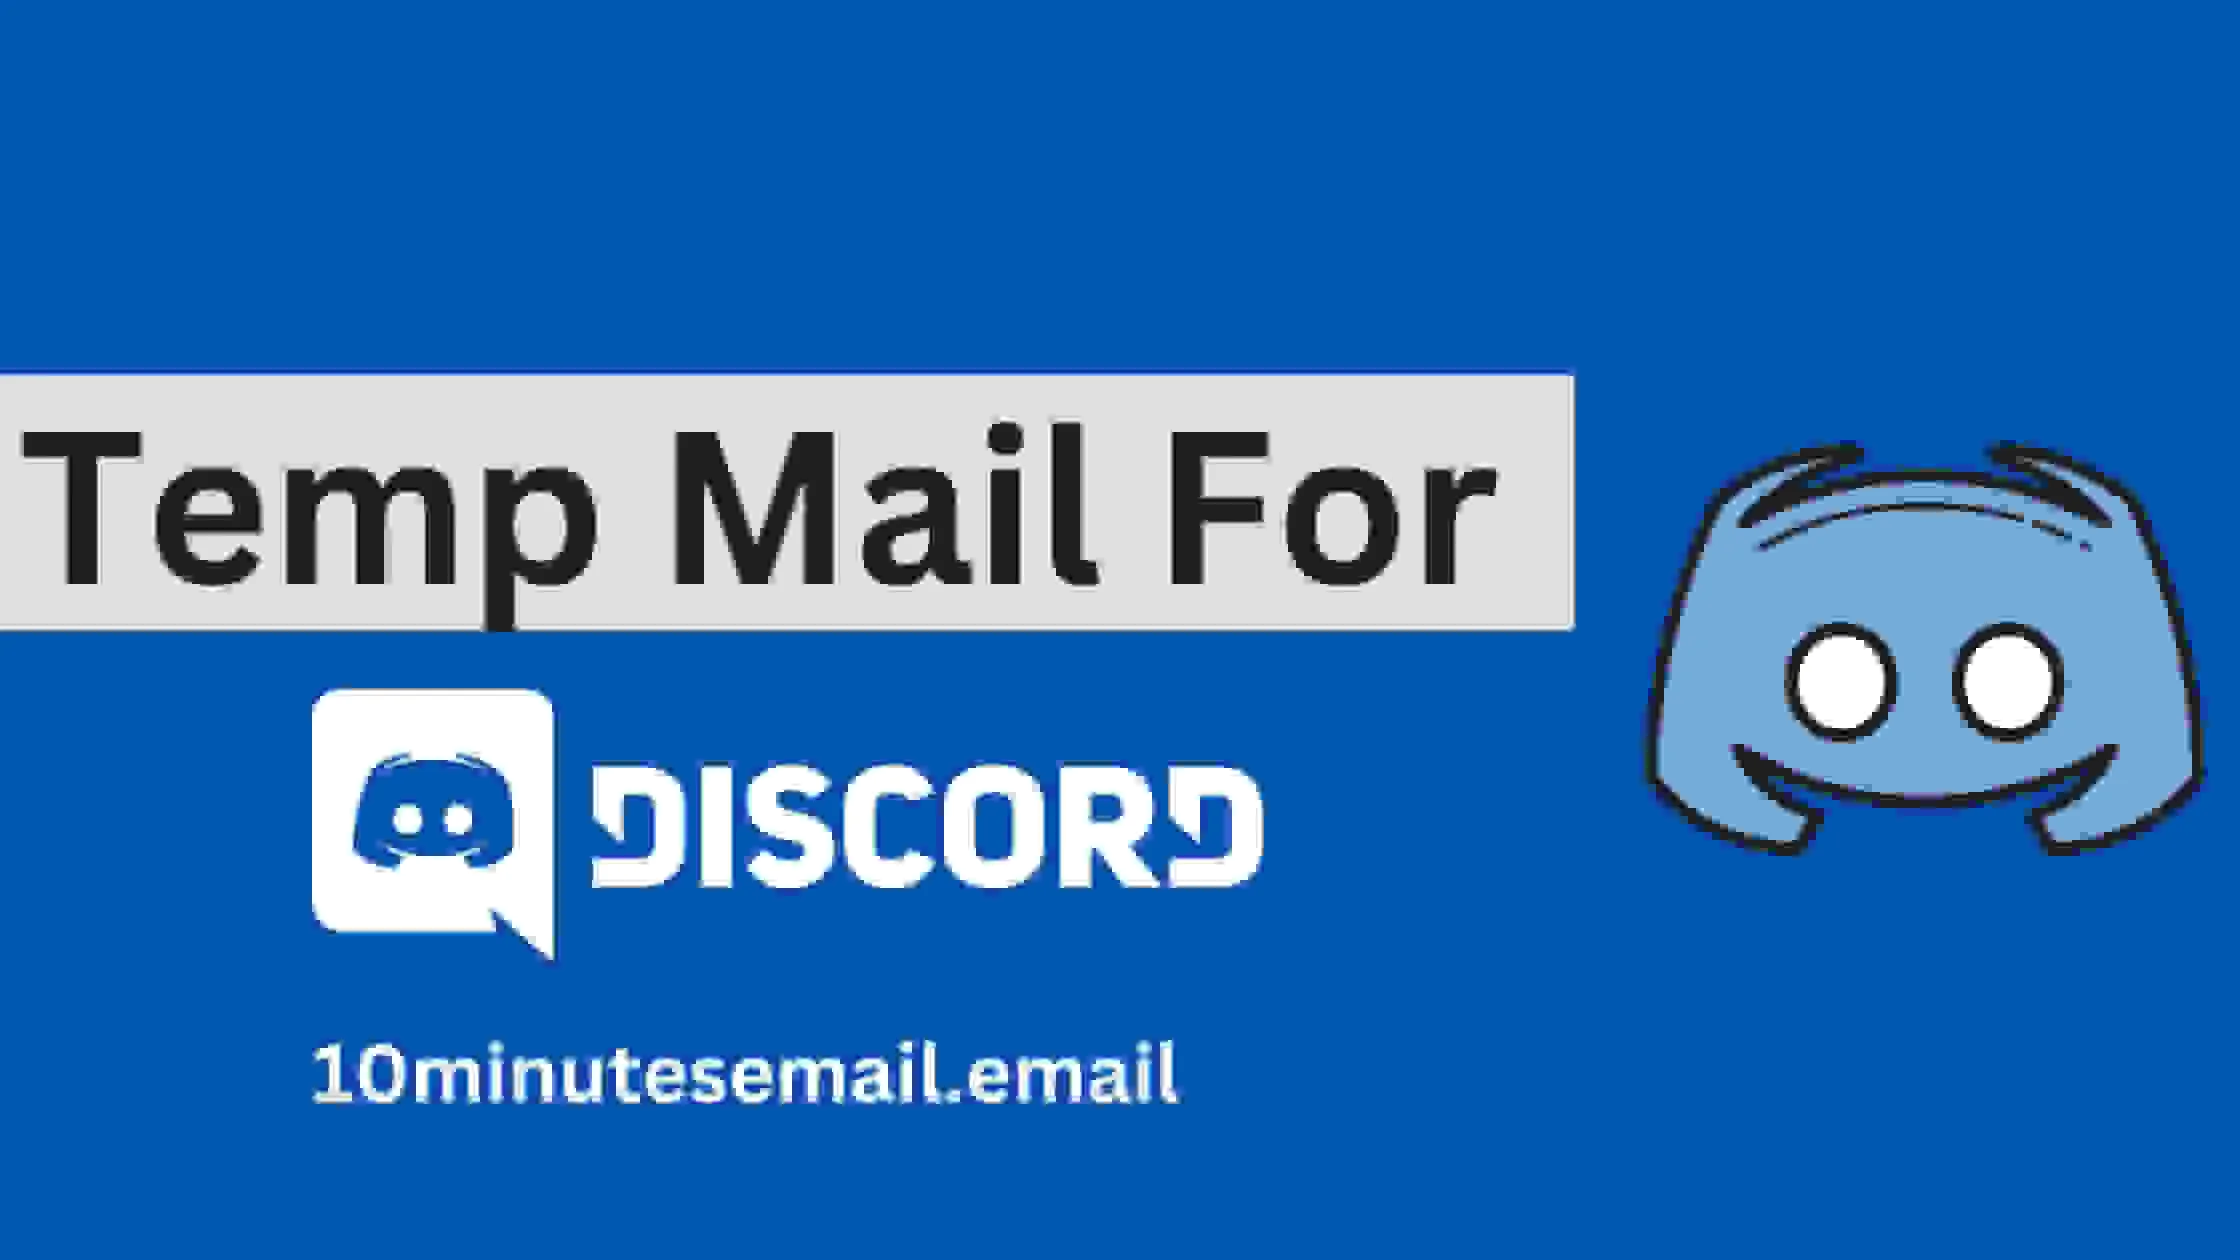 10 Minutes Email Temp Mail for Discord